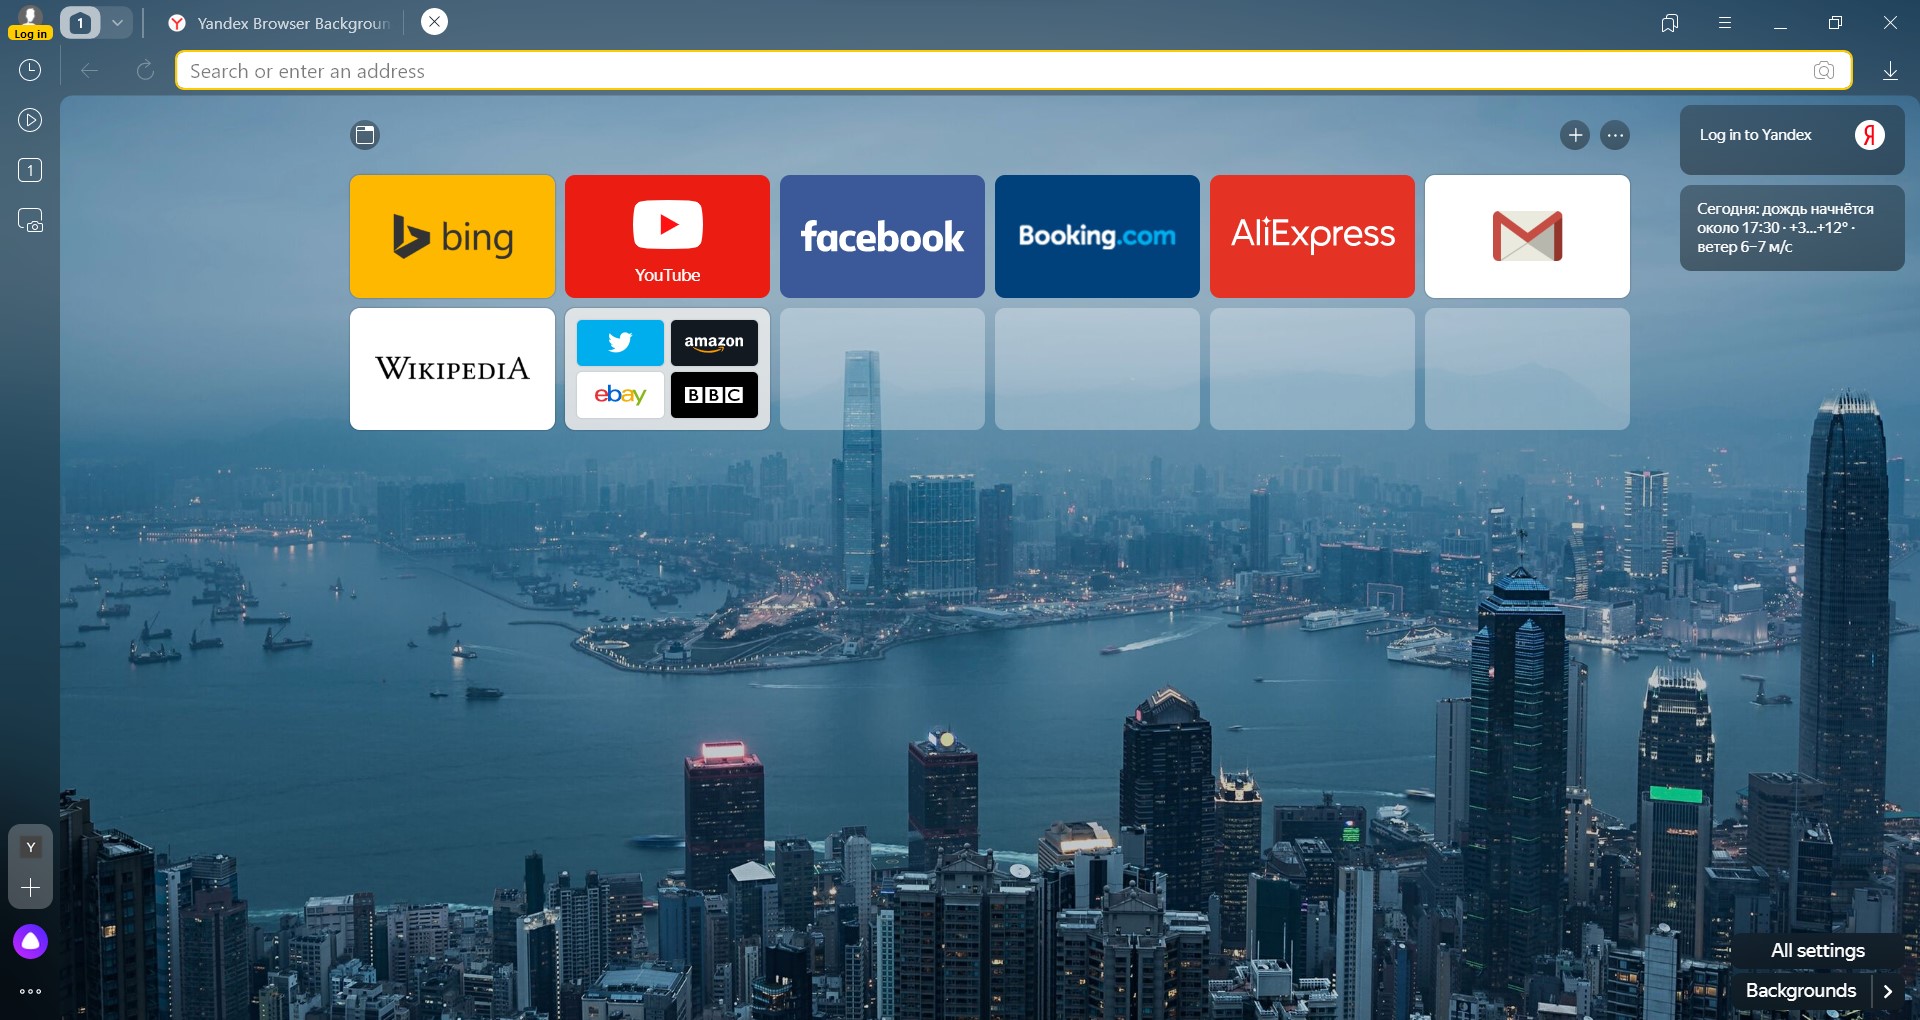 screenshot yandex browser with background